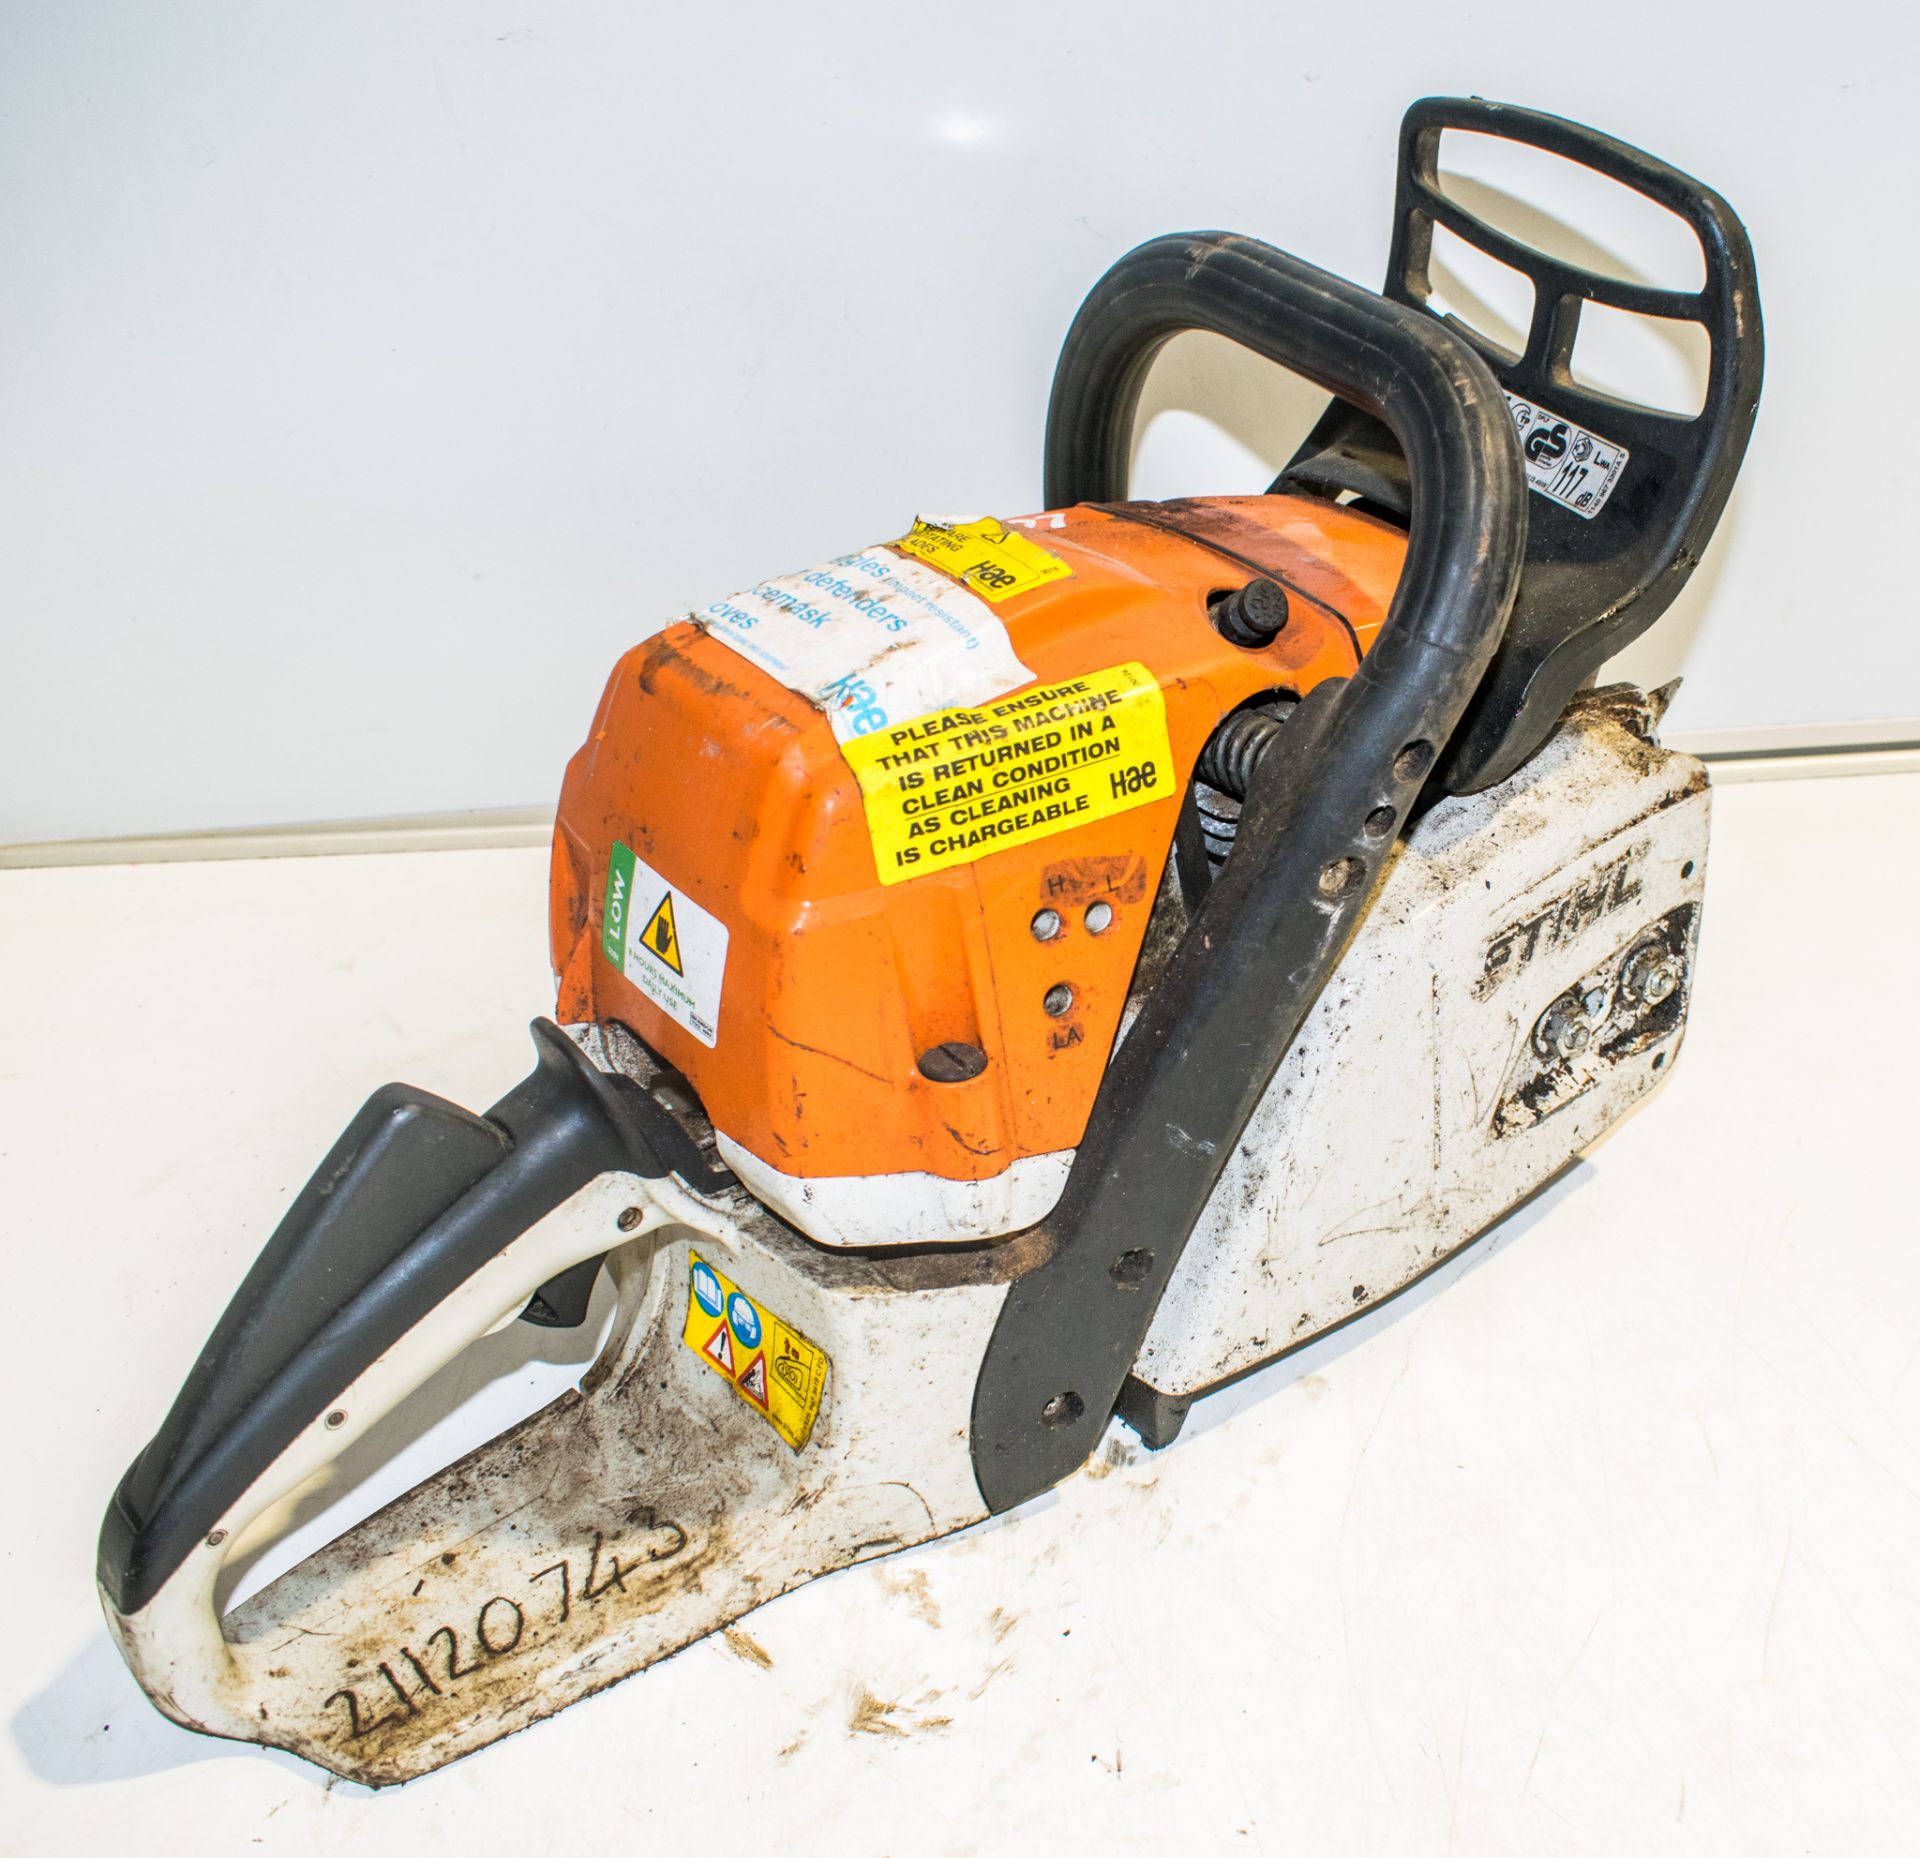 Stihl MS362C petrol driven chainsaw ** Parts missing ** - Image 2 of 2